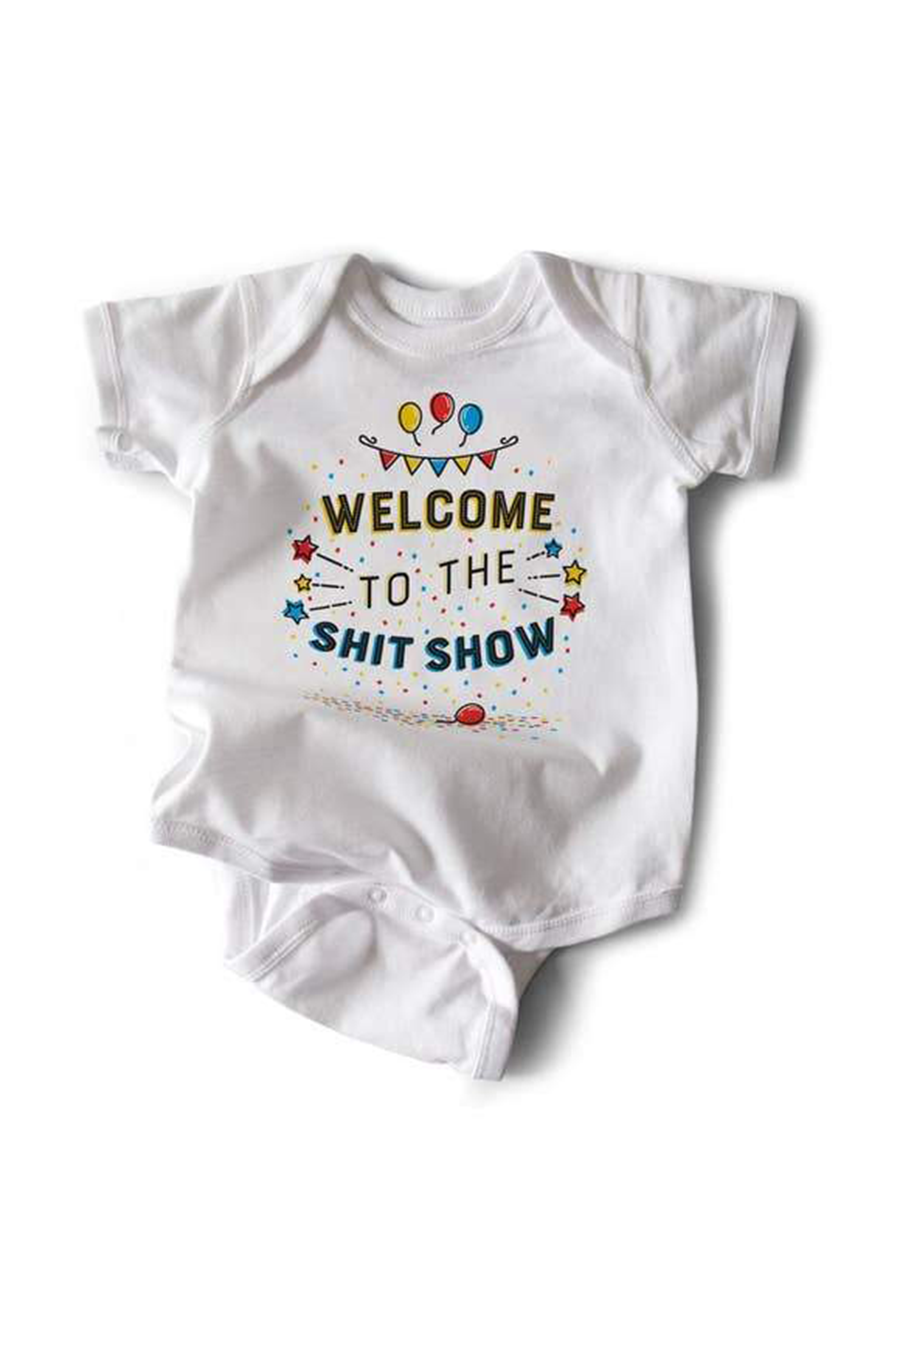 Shit Show Onesie | White - West of Camden - Main Image Number 1 of 2